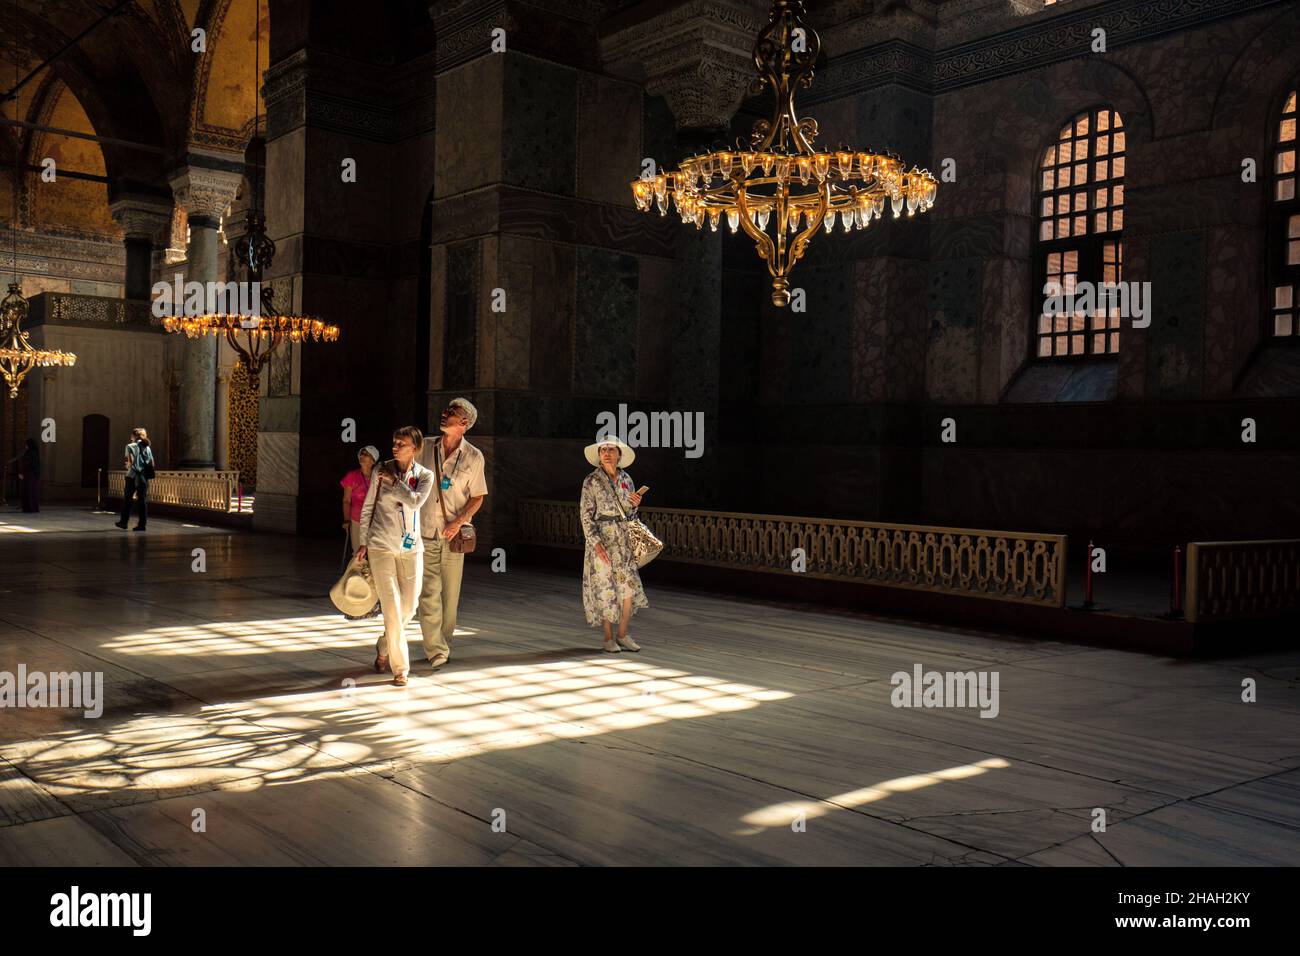 Tourist wanders inside the Hagia Sophia museum in Istanbul with admiration. Stock Photo